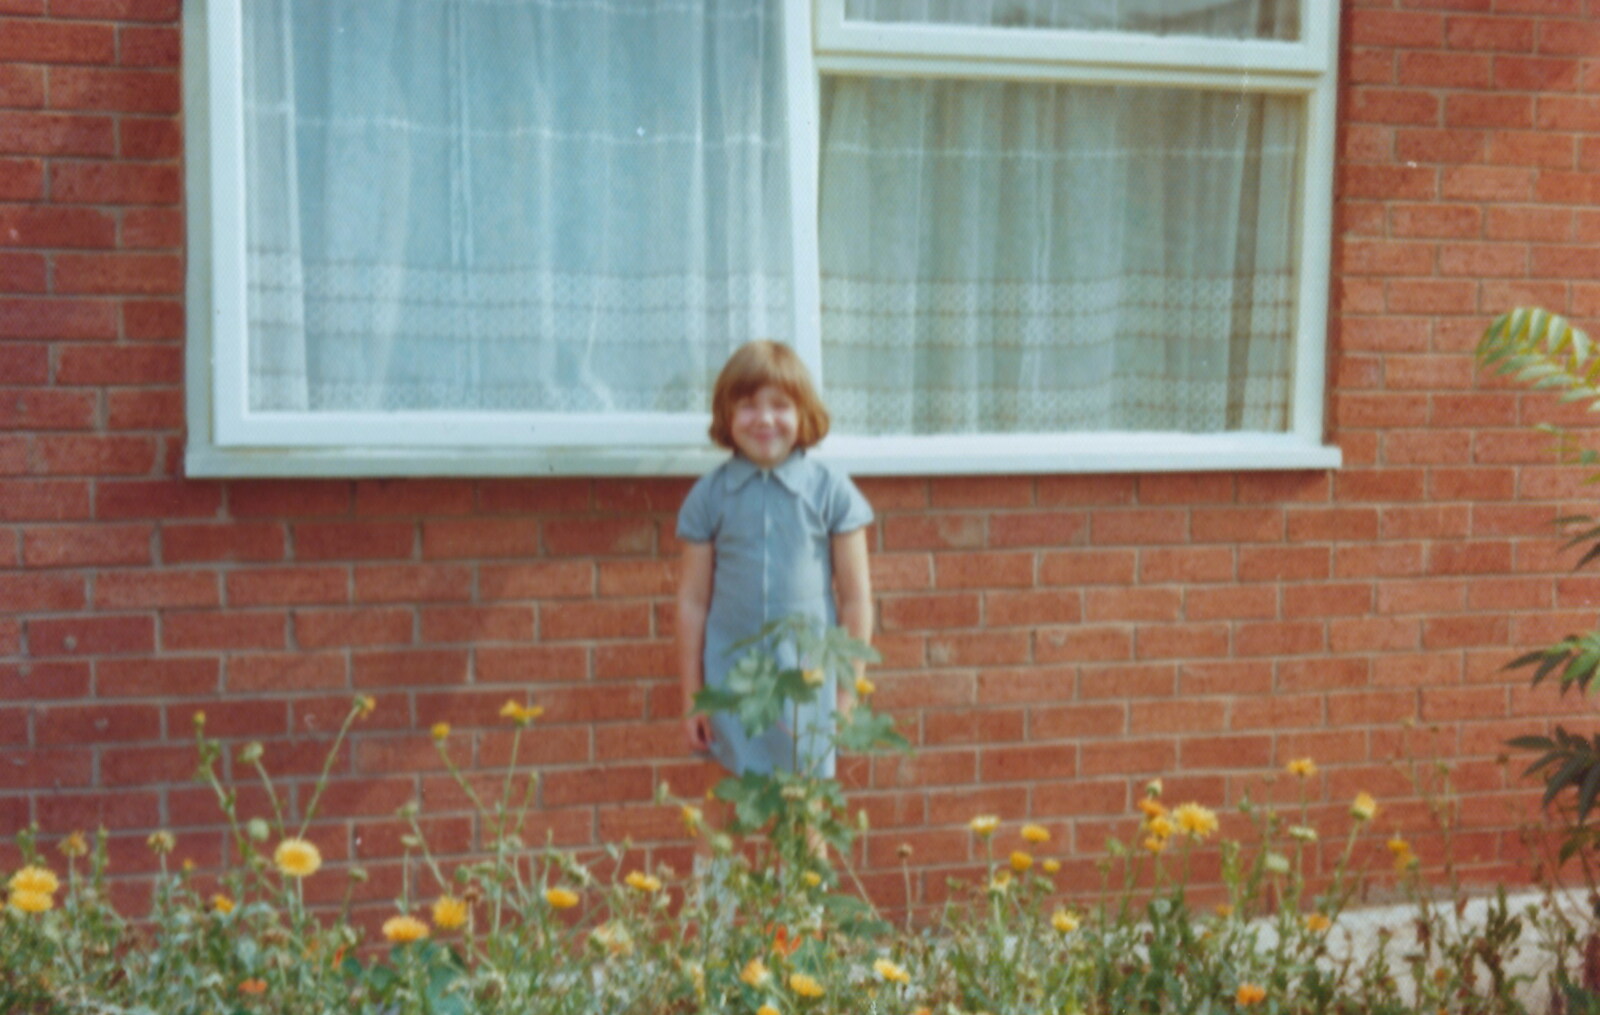 Family History: Birtle's Close, Sandbach, Cheshire - 24th January 2020: Sis stands in a flower bed